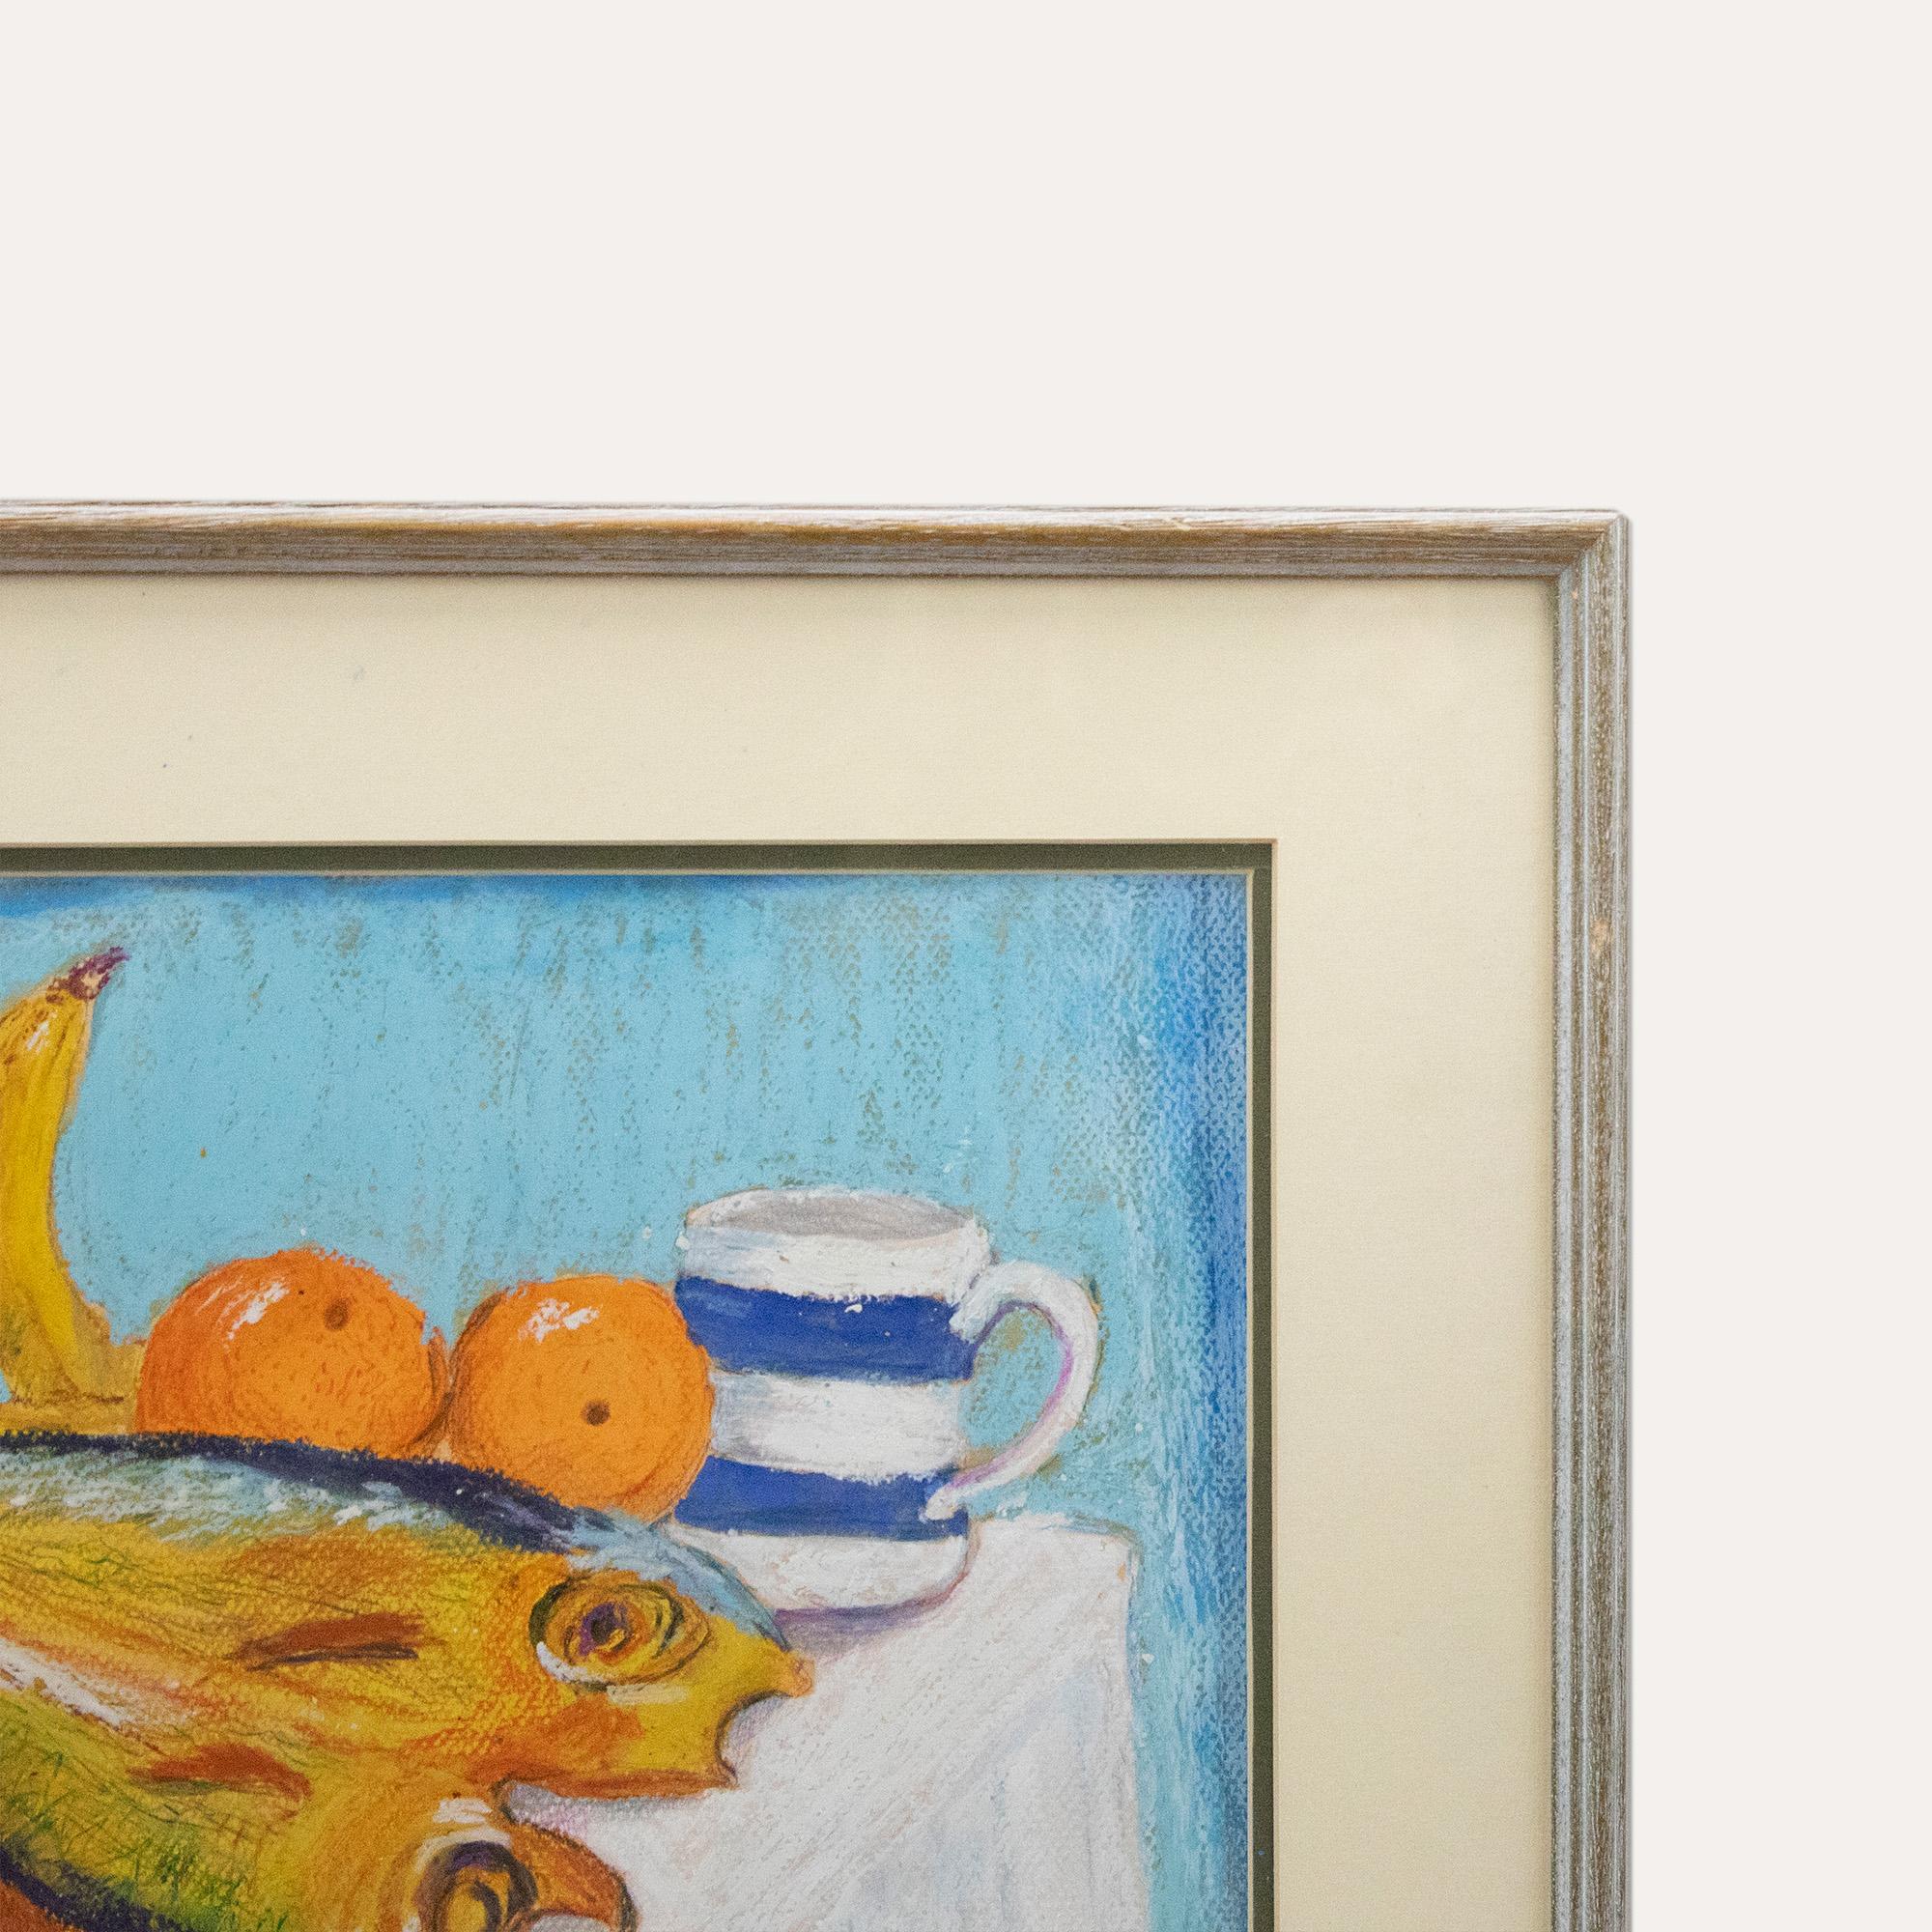 A charming pastel scene depicting two dead fish placed with banana, oranges and a striped mug. The artist captures the composition in a vibrant colour palette creating a fun and lighthearted still life study. Signed and dated to the lower right.